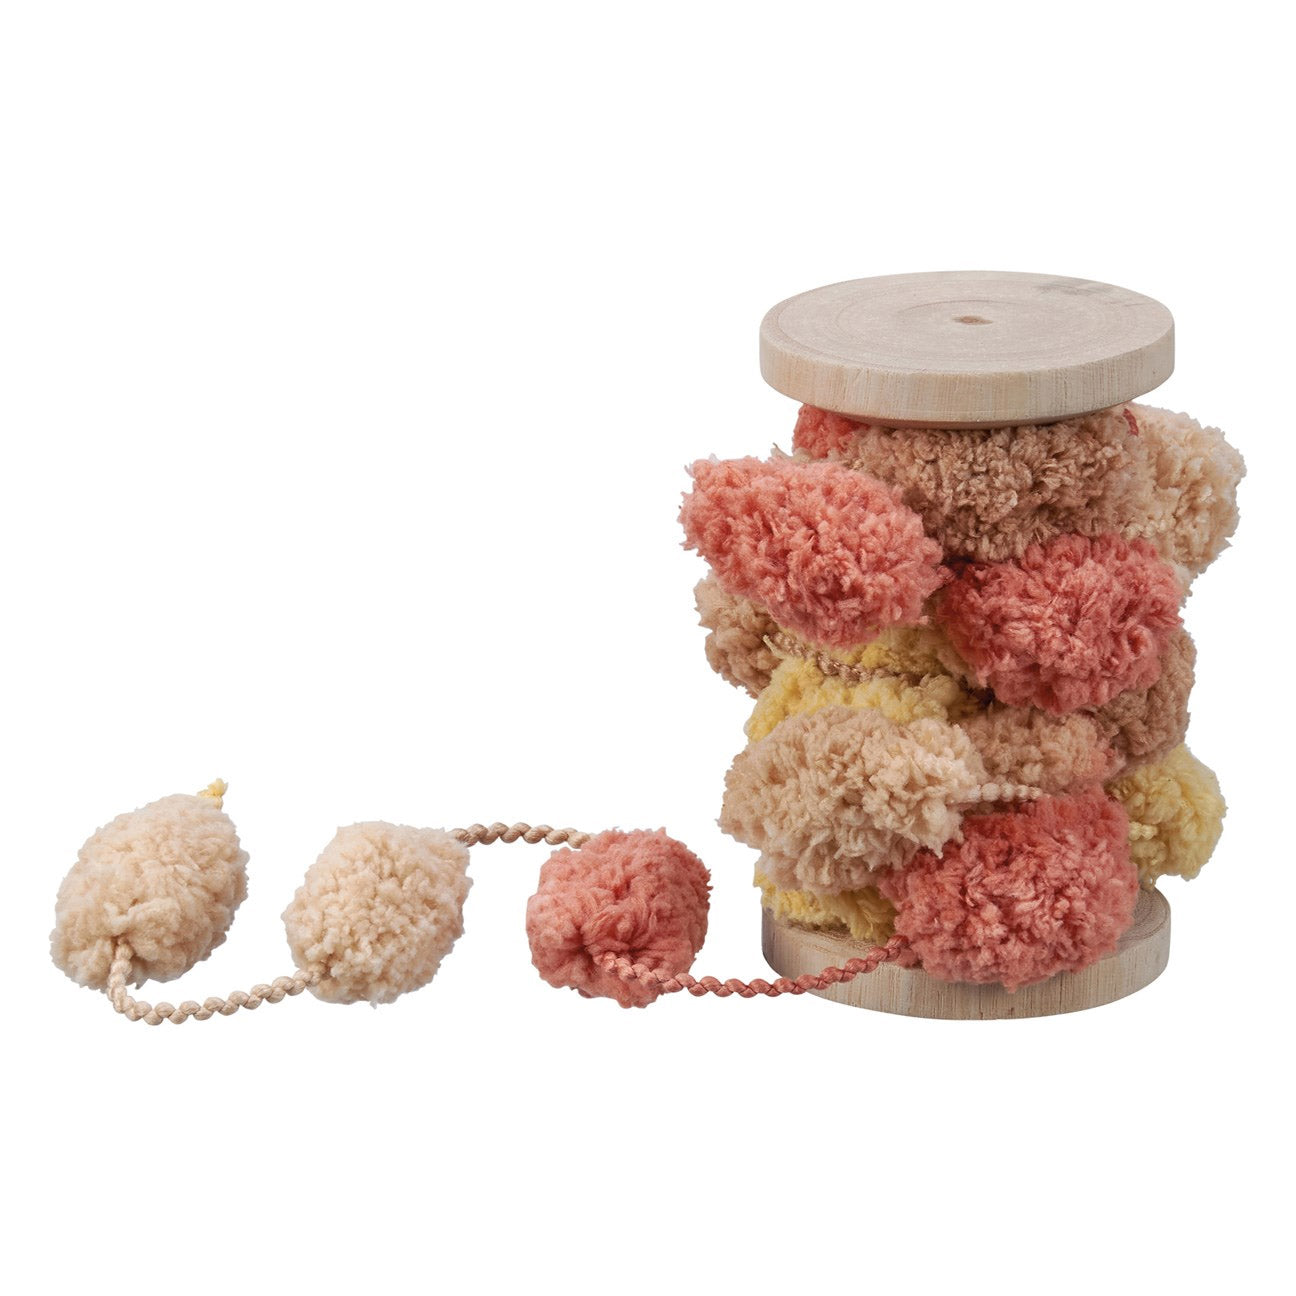 Coral and Tan Pom Pom Garland on Wooden Spool Coming Soon